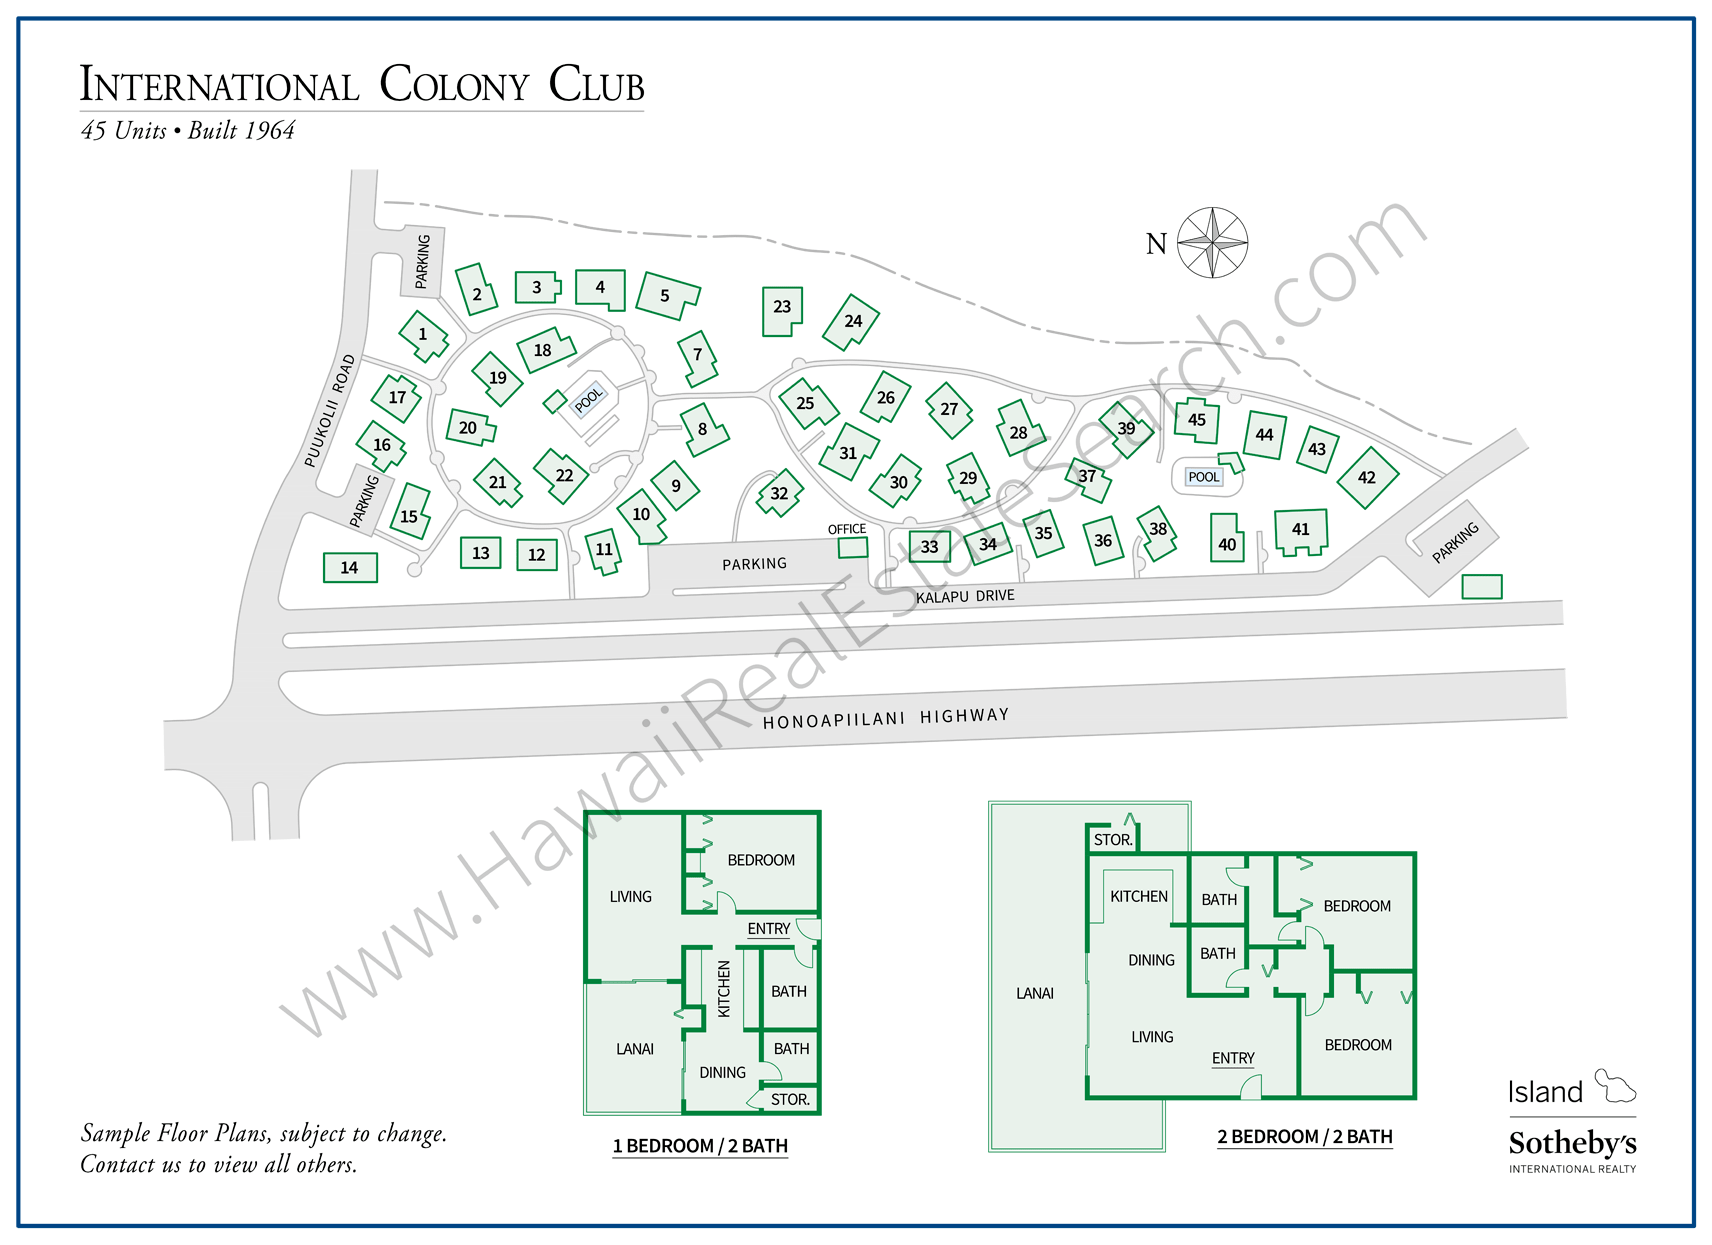 International Colony Club Map and Floor Plans